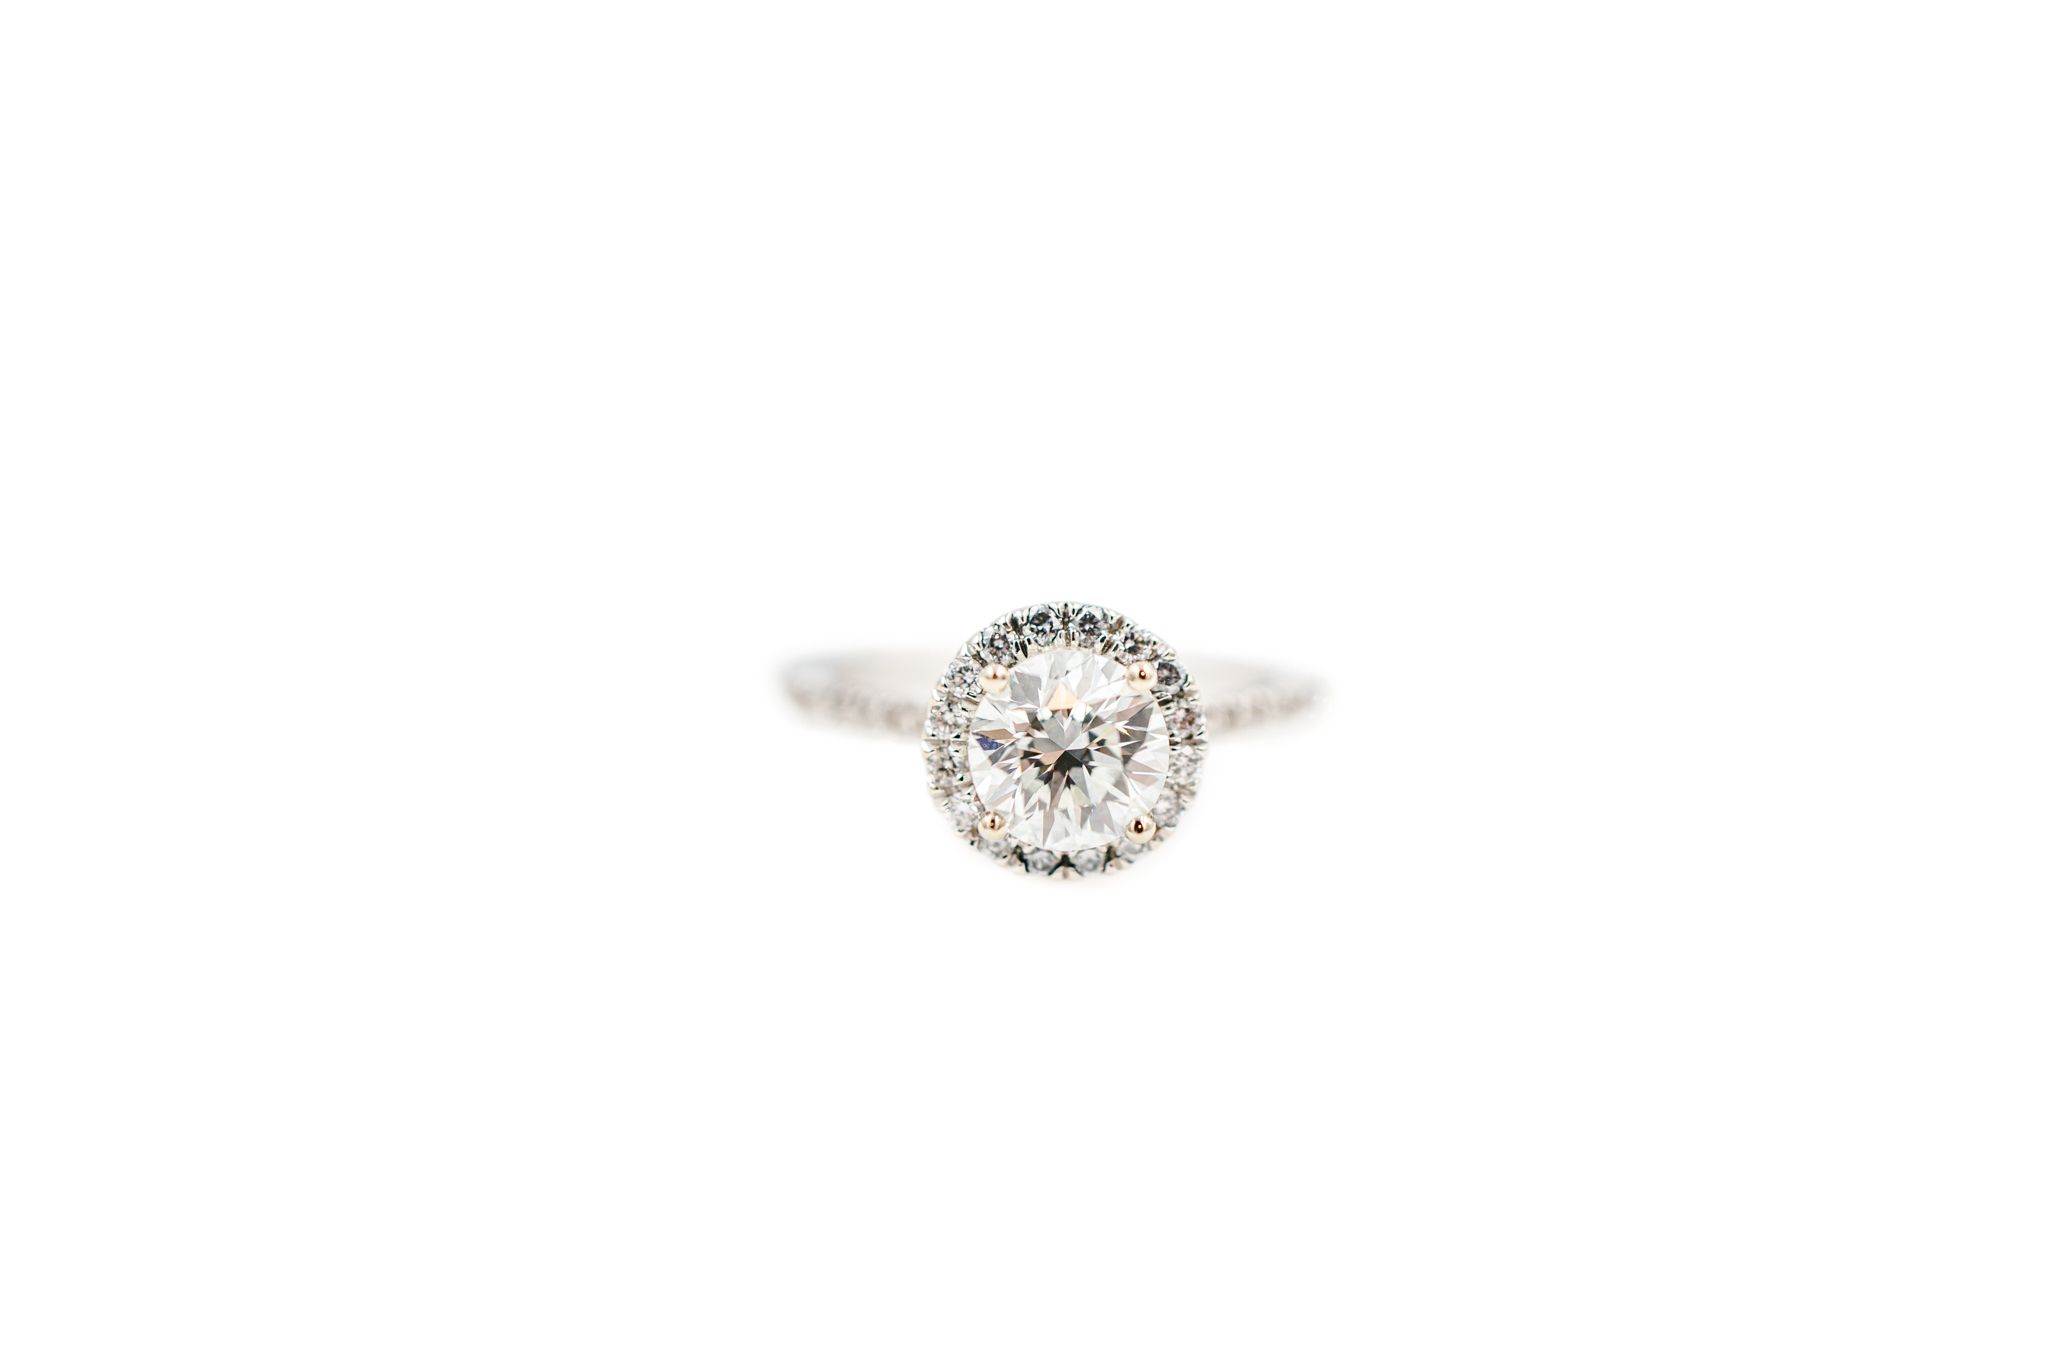 The Top 5 Best Selling 1 Carat Engagement Rings